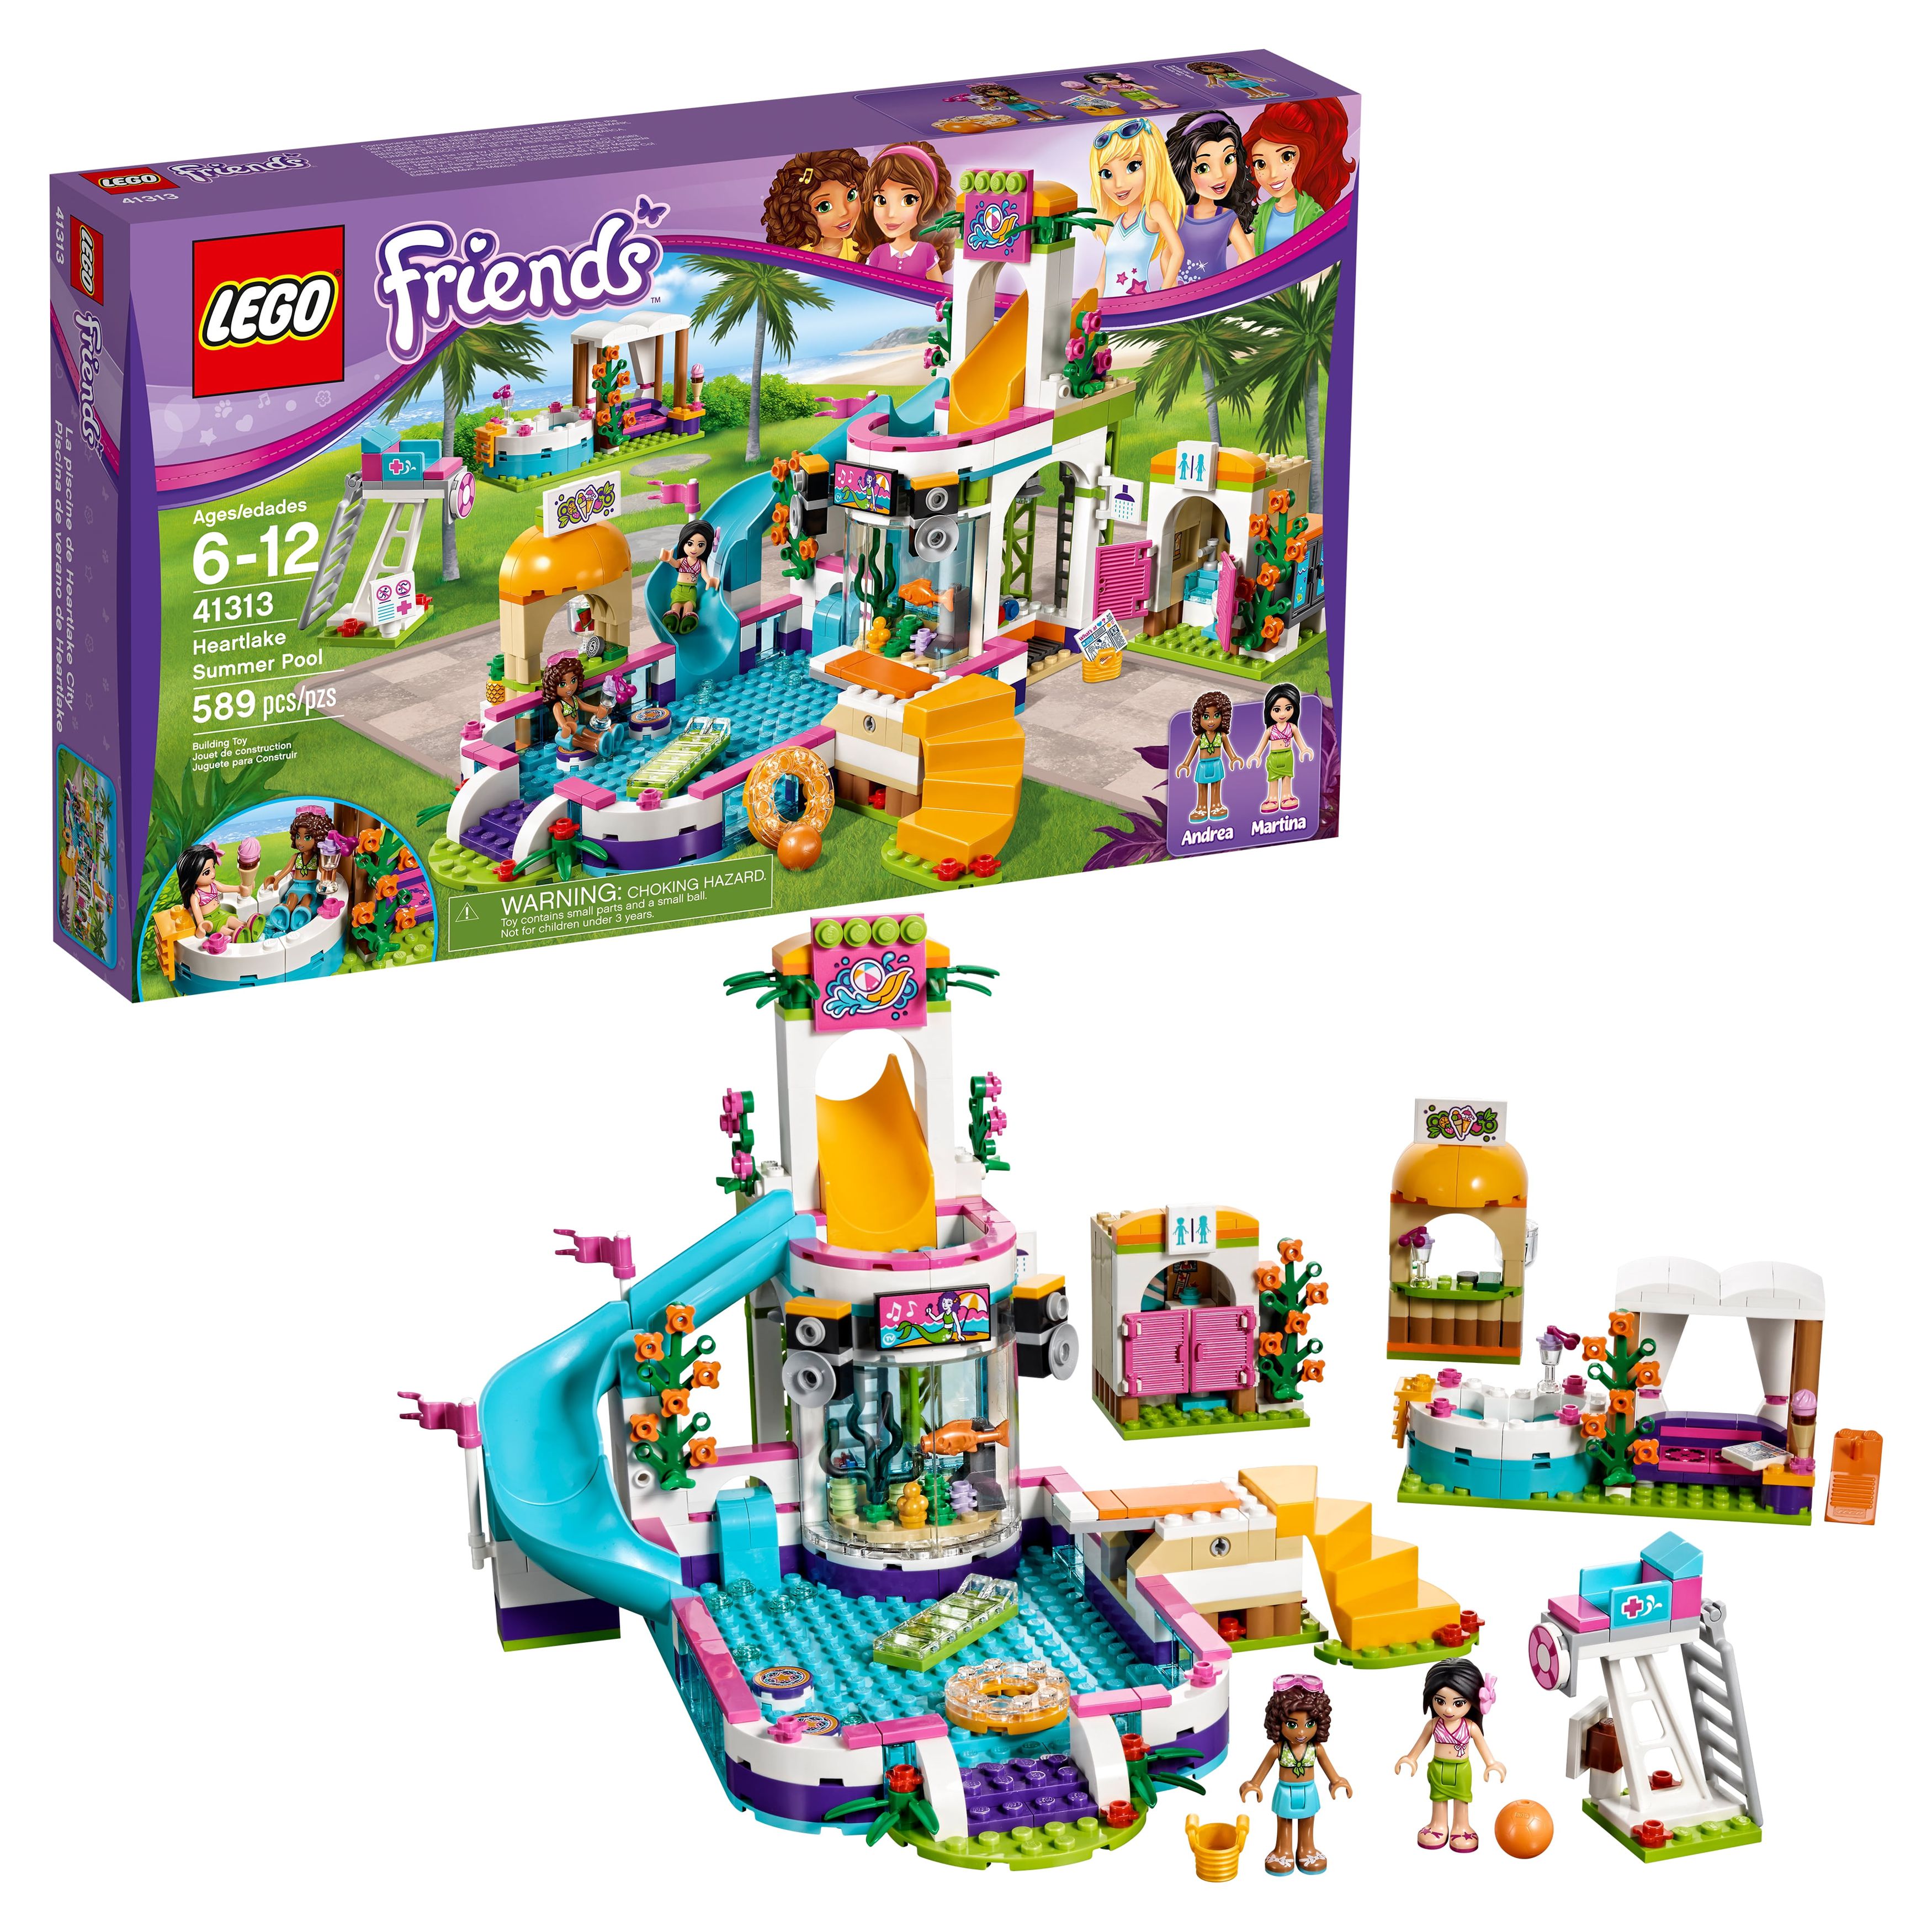 LEGO Friends Heartlake Summer Pool 41313 (589 Pieces) - image 1 of 7